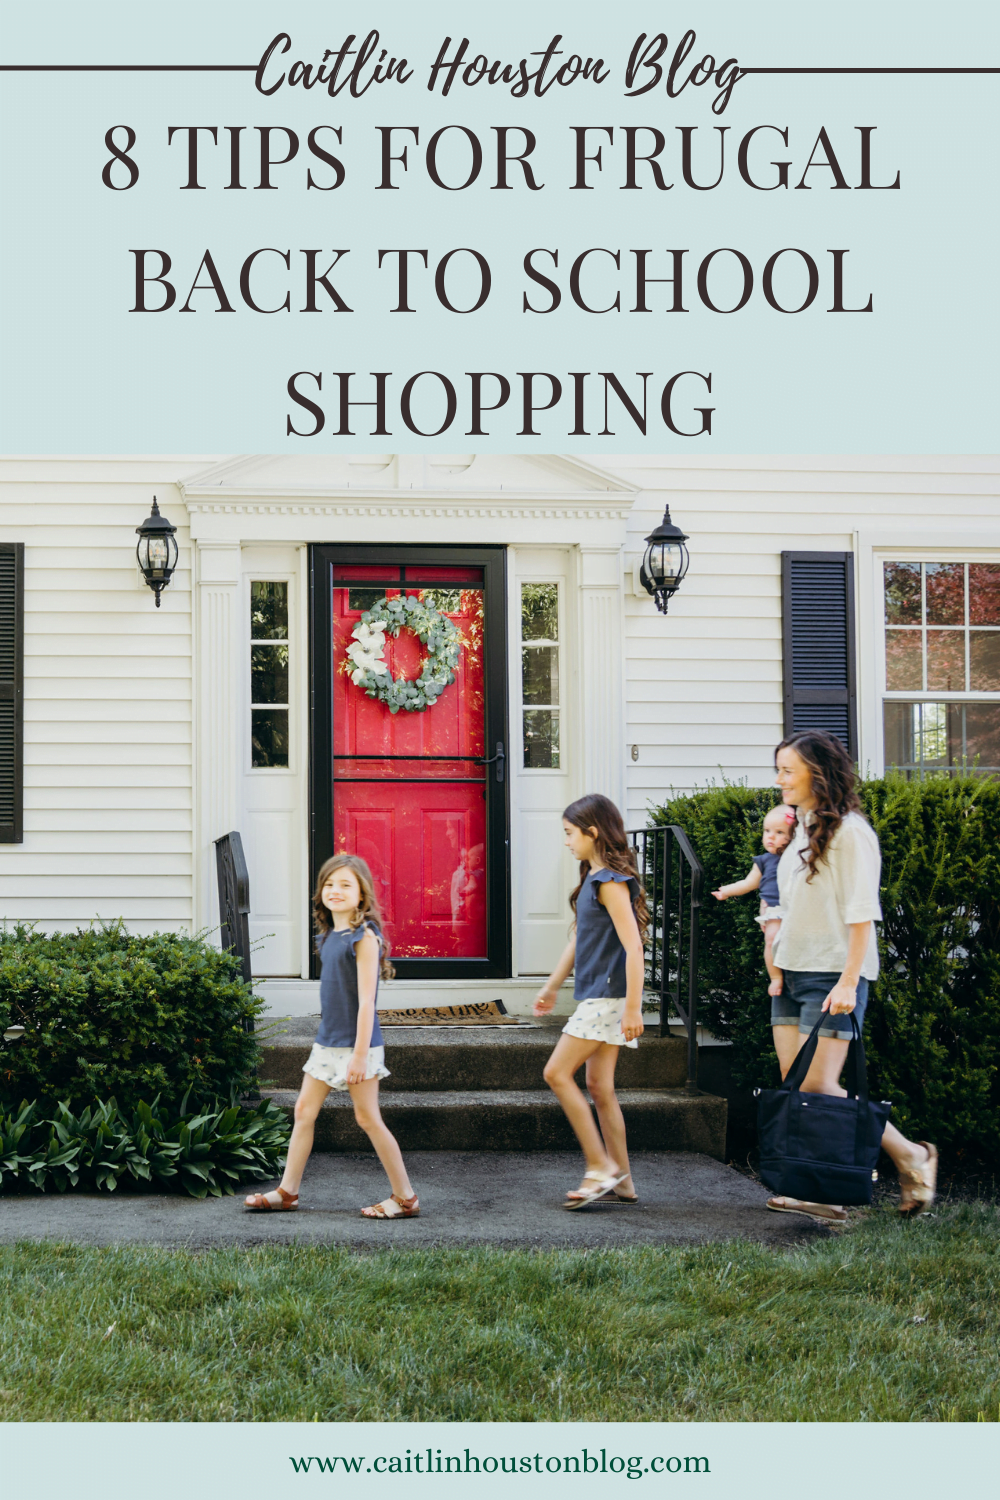 Tips for Frugal Back to School Shopping